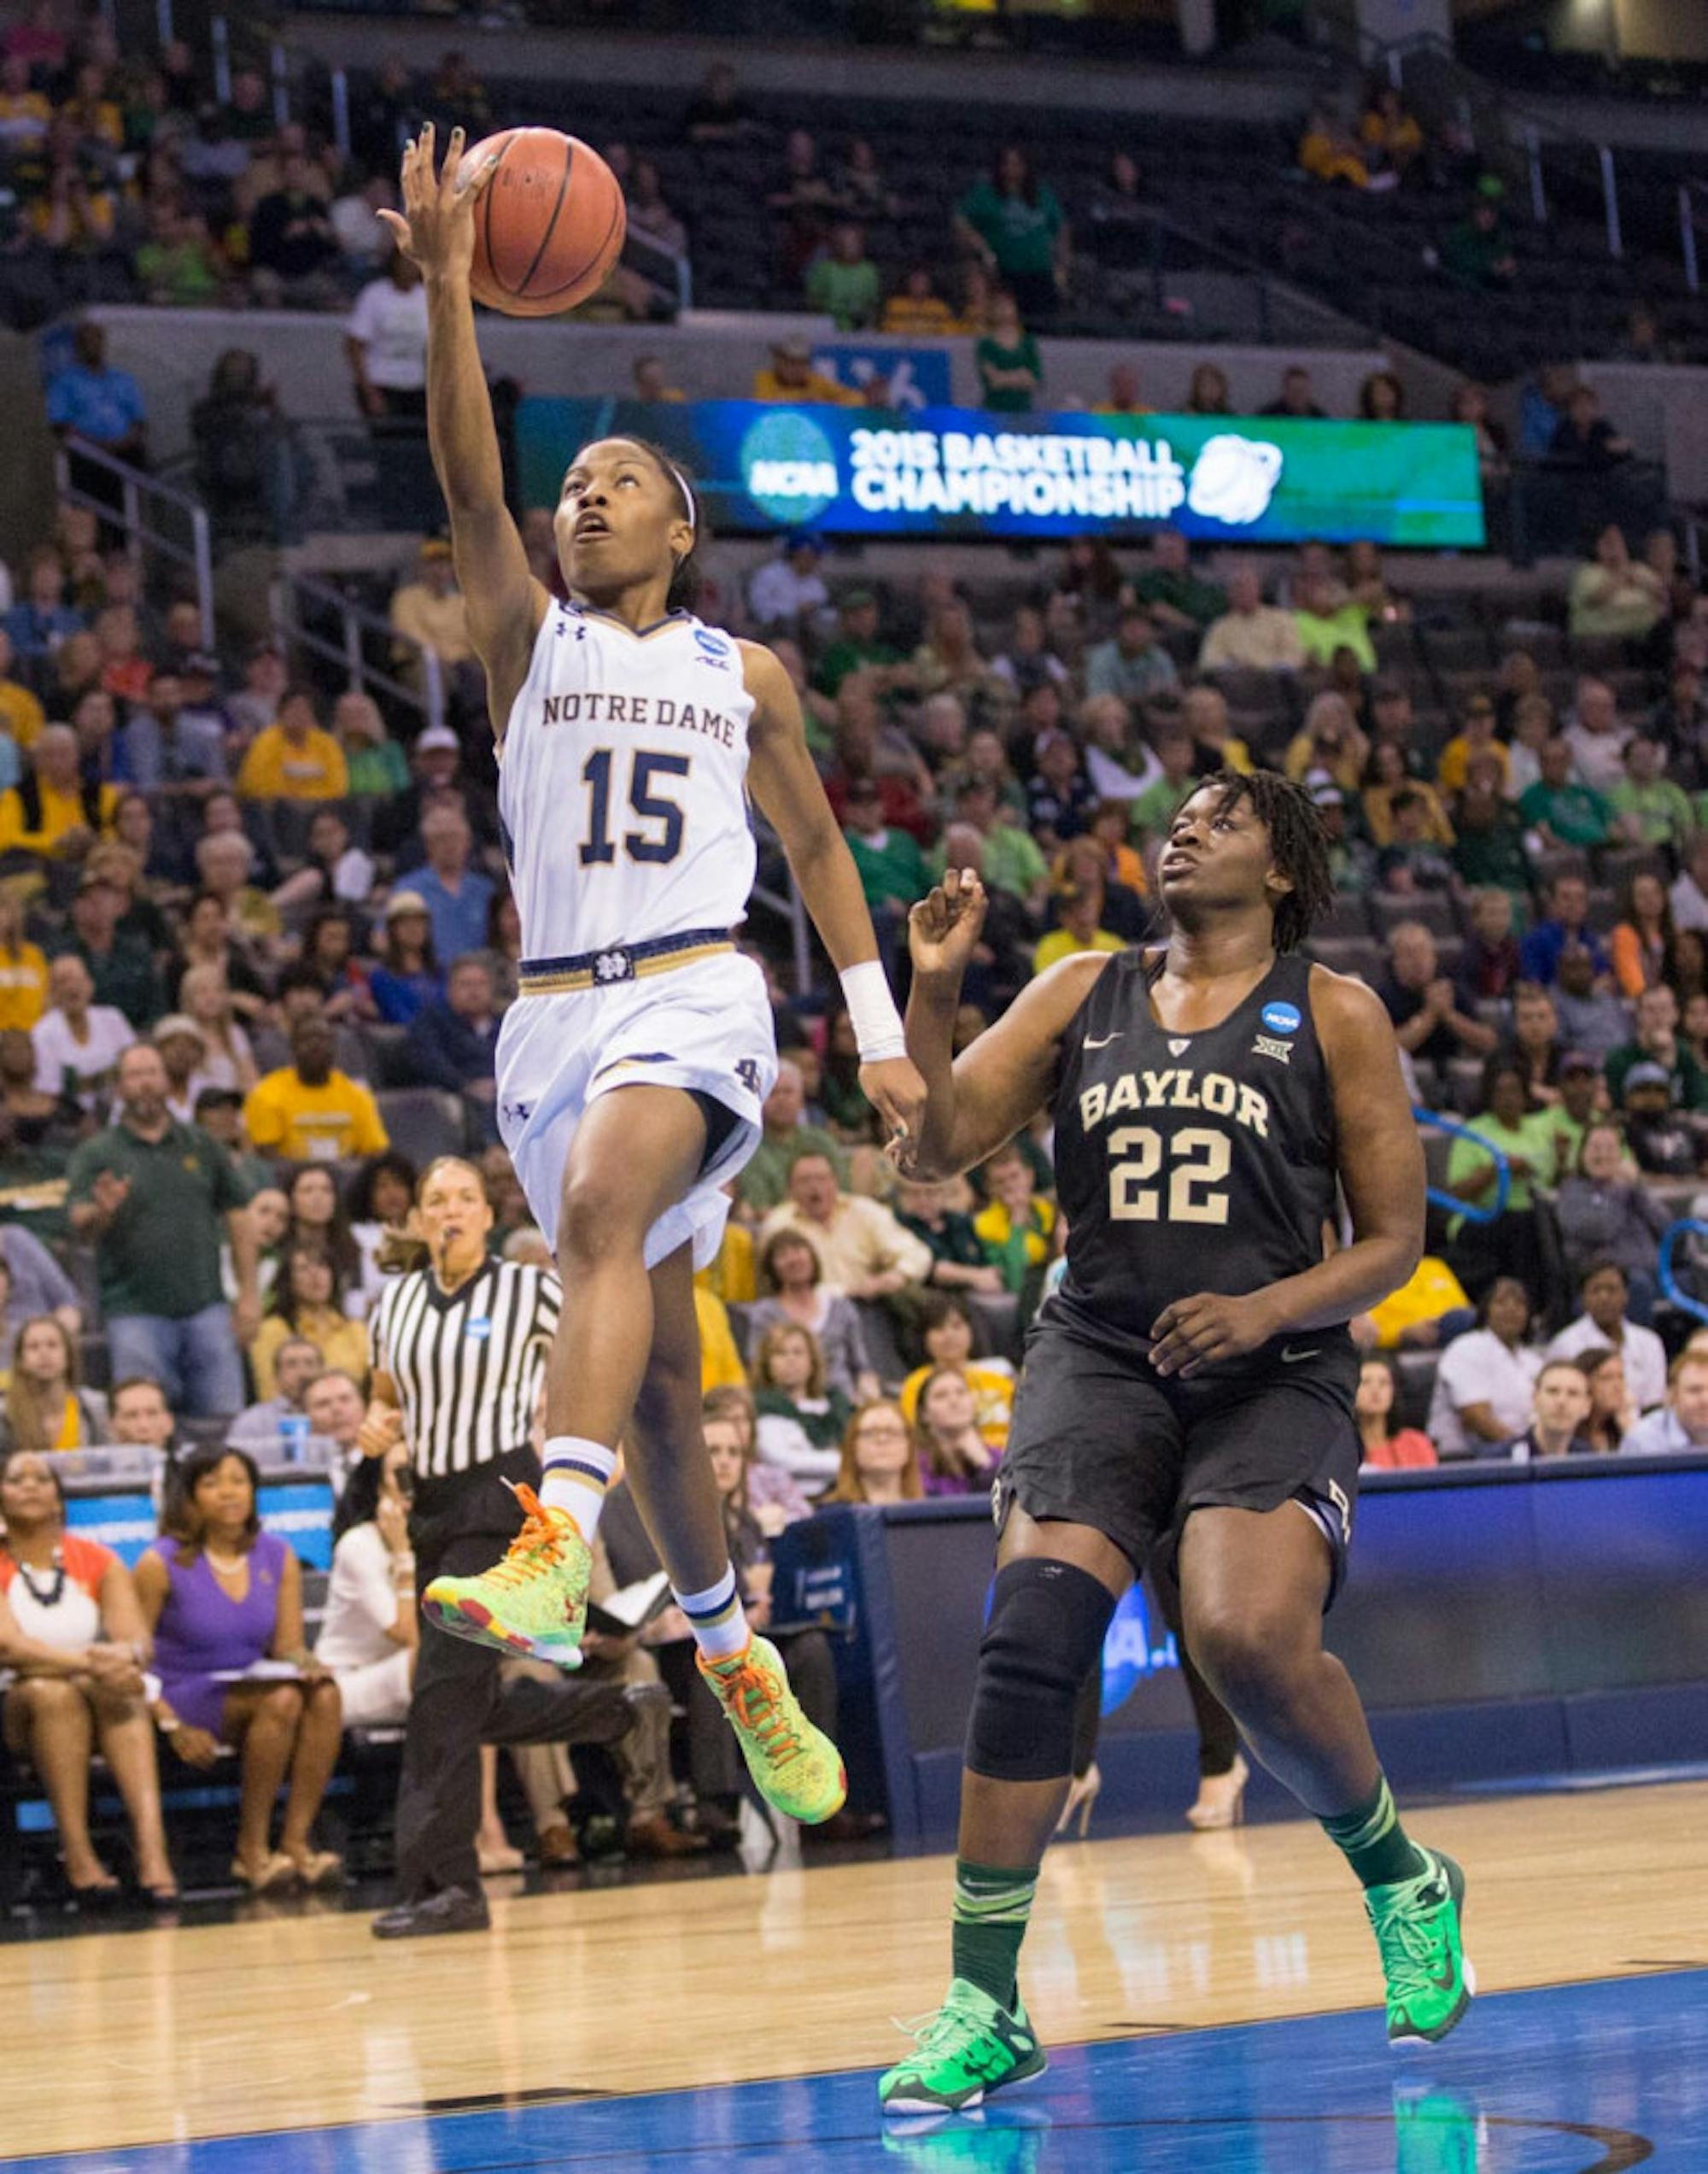 Irish sophomore guard Lindsay Allen collects two of her 23 points with a layup in a 77-68 win over Baylor.